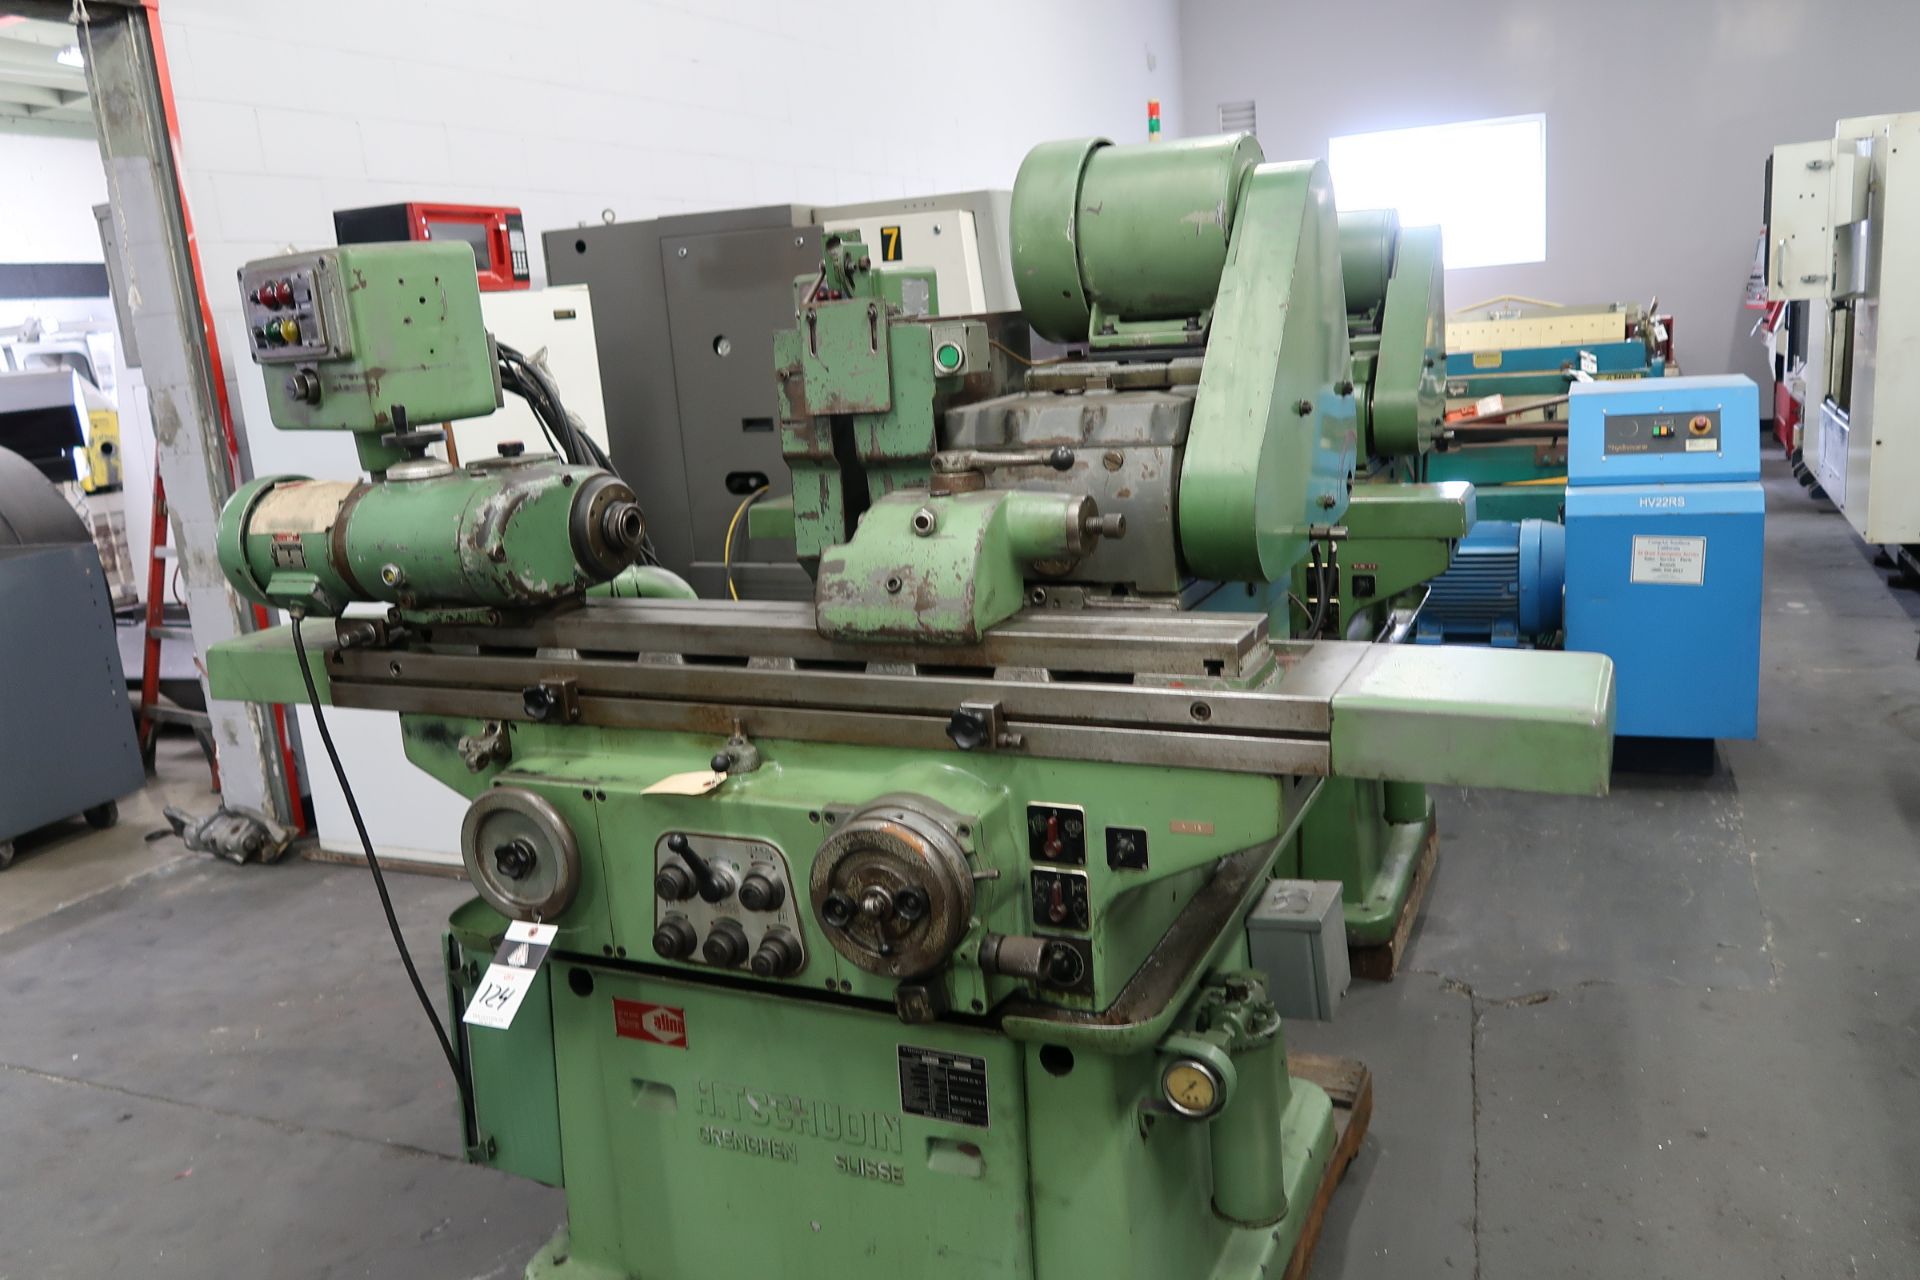 Tschudin HTG400 8” x 24” Cyl Grinder s/n 691302 w/ Motorized 5C Work Head, Tailstock, SOLD AS IS - Image 3 of 9